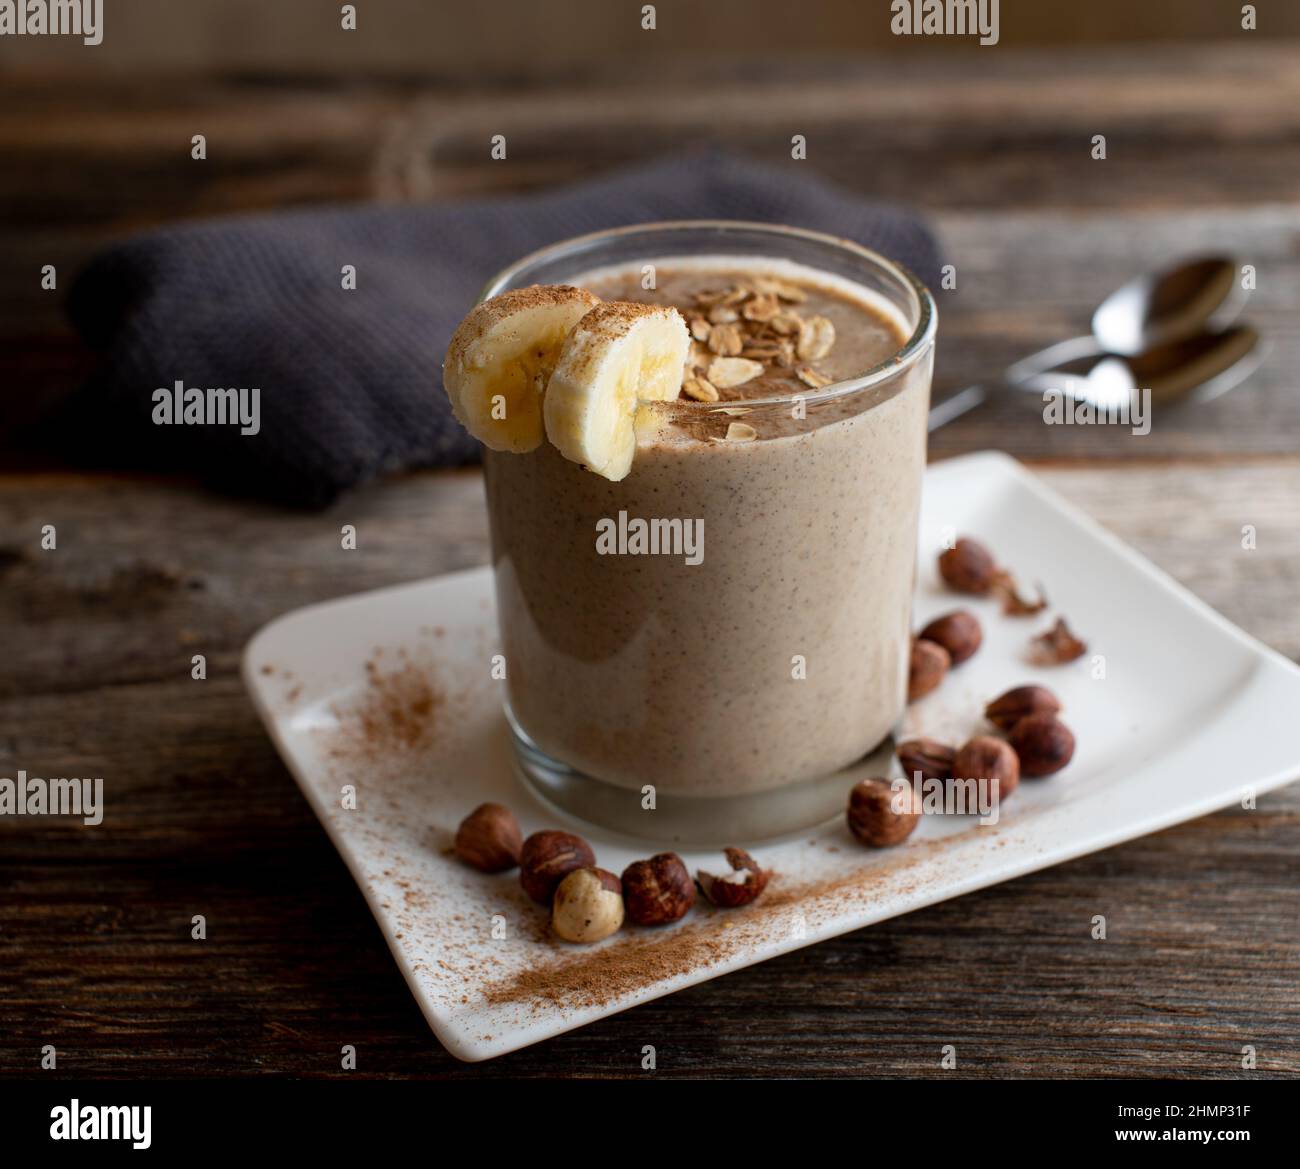 Protein smoothie made with chocolate whey powder, oat flakes, bananas, hazelnuts and cinnamon. Stock Photo